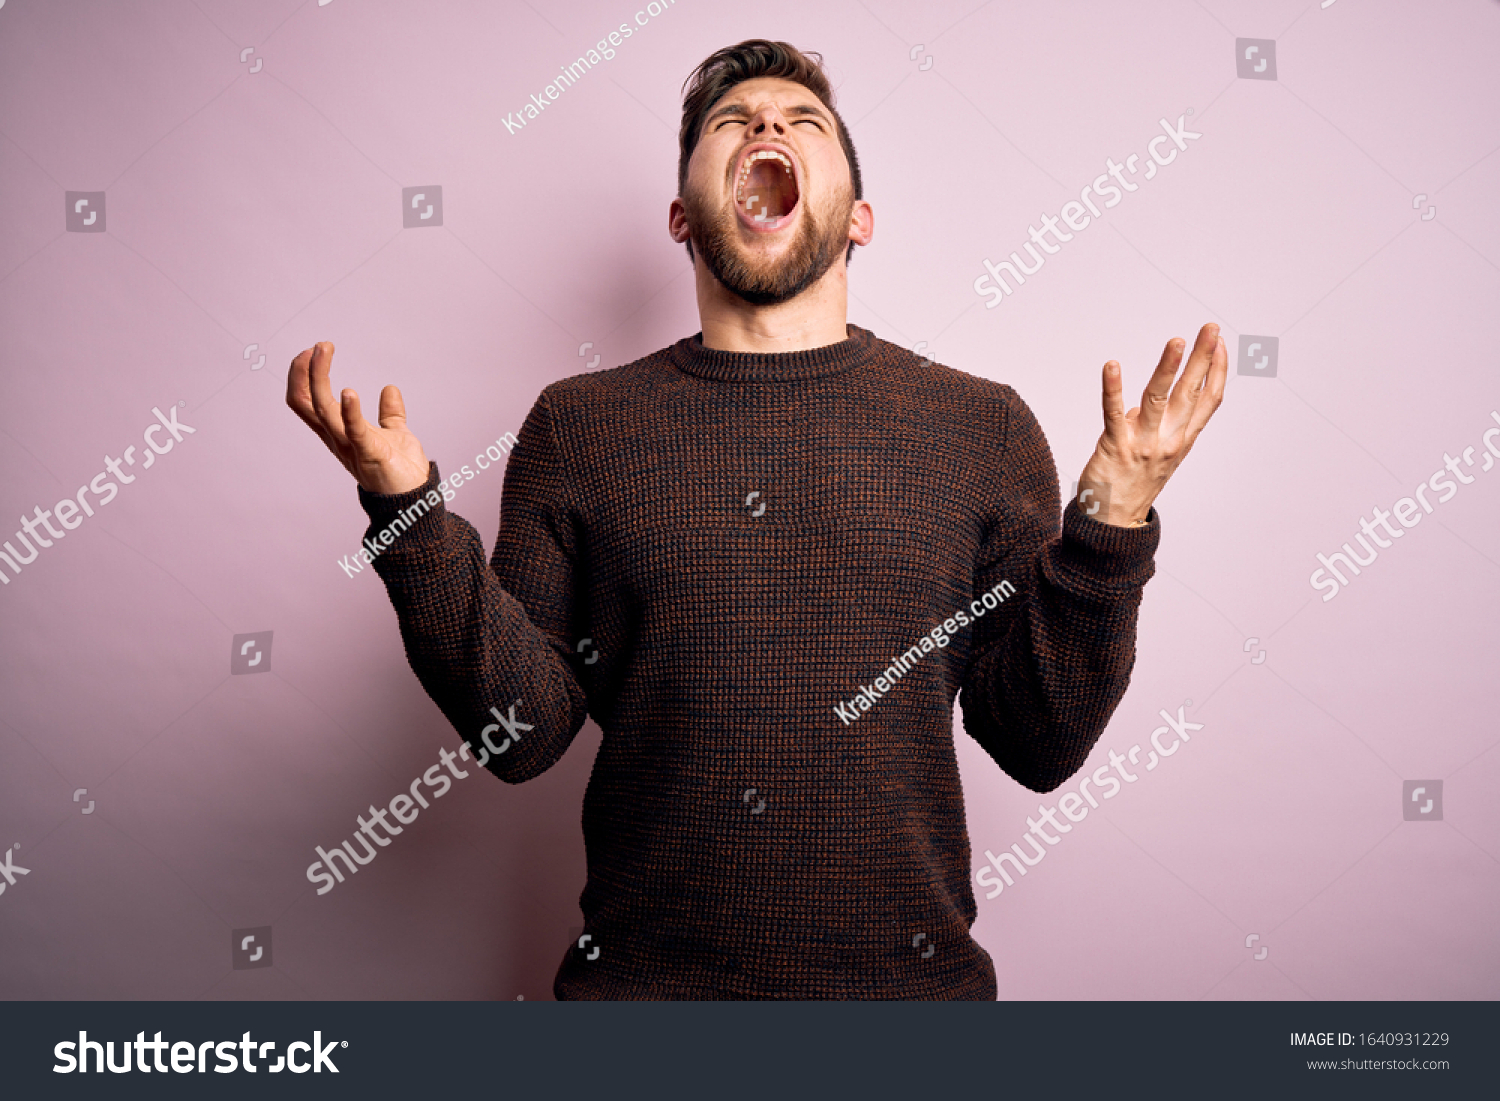 Young blond man with beard and blue eyes wearing casual sweater over pink background crazy and mad shouting and yelling with aggressive expression and arms raised. Frustration concept. #1640931229